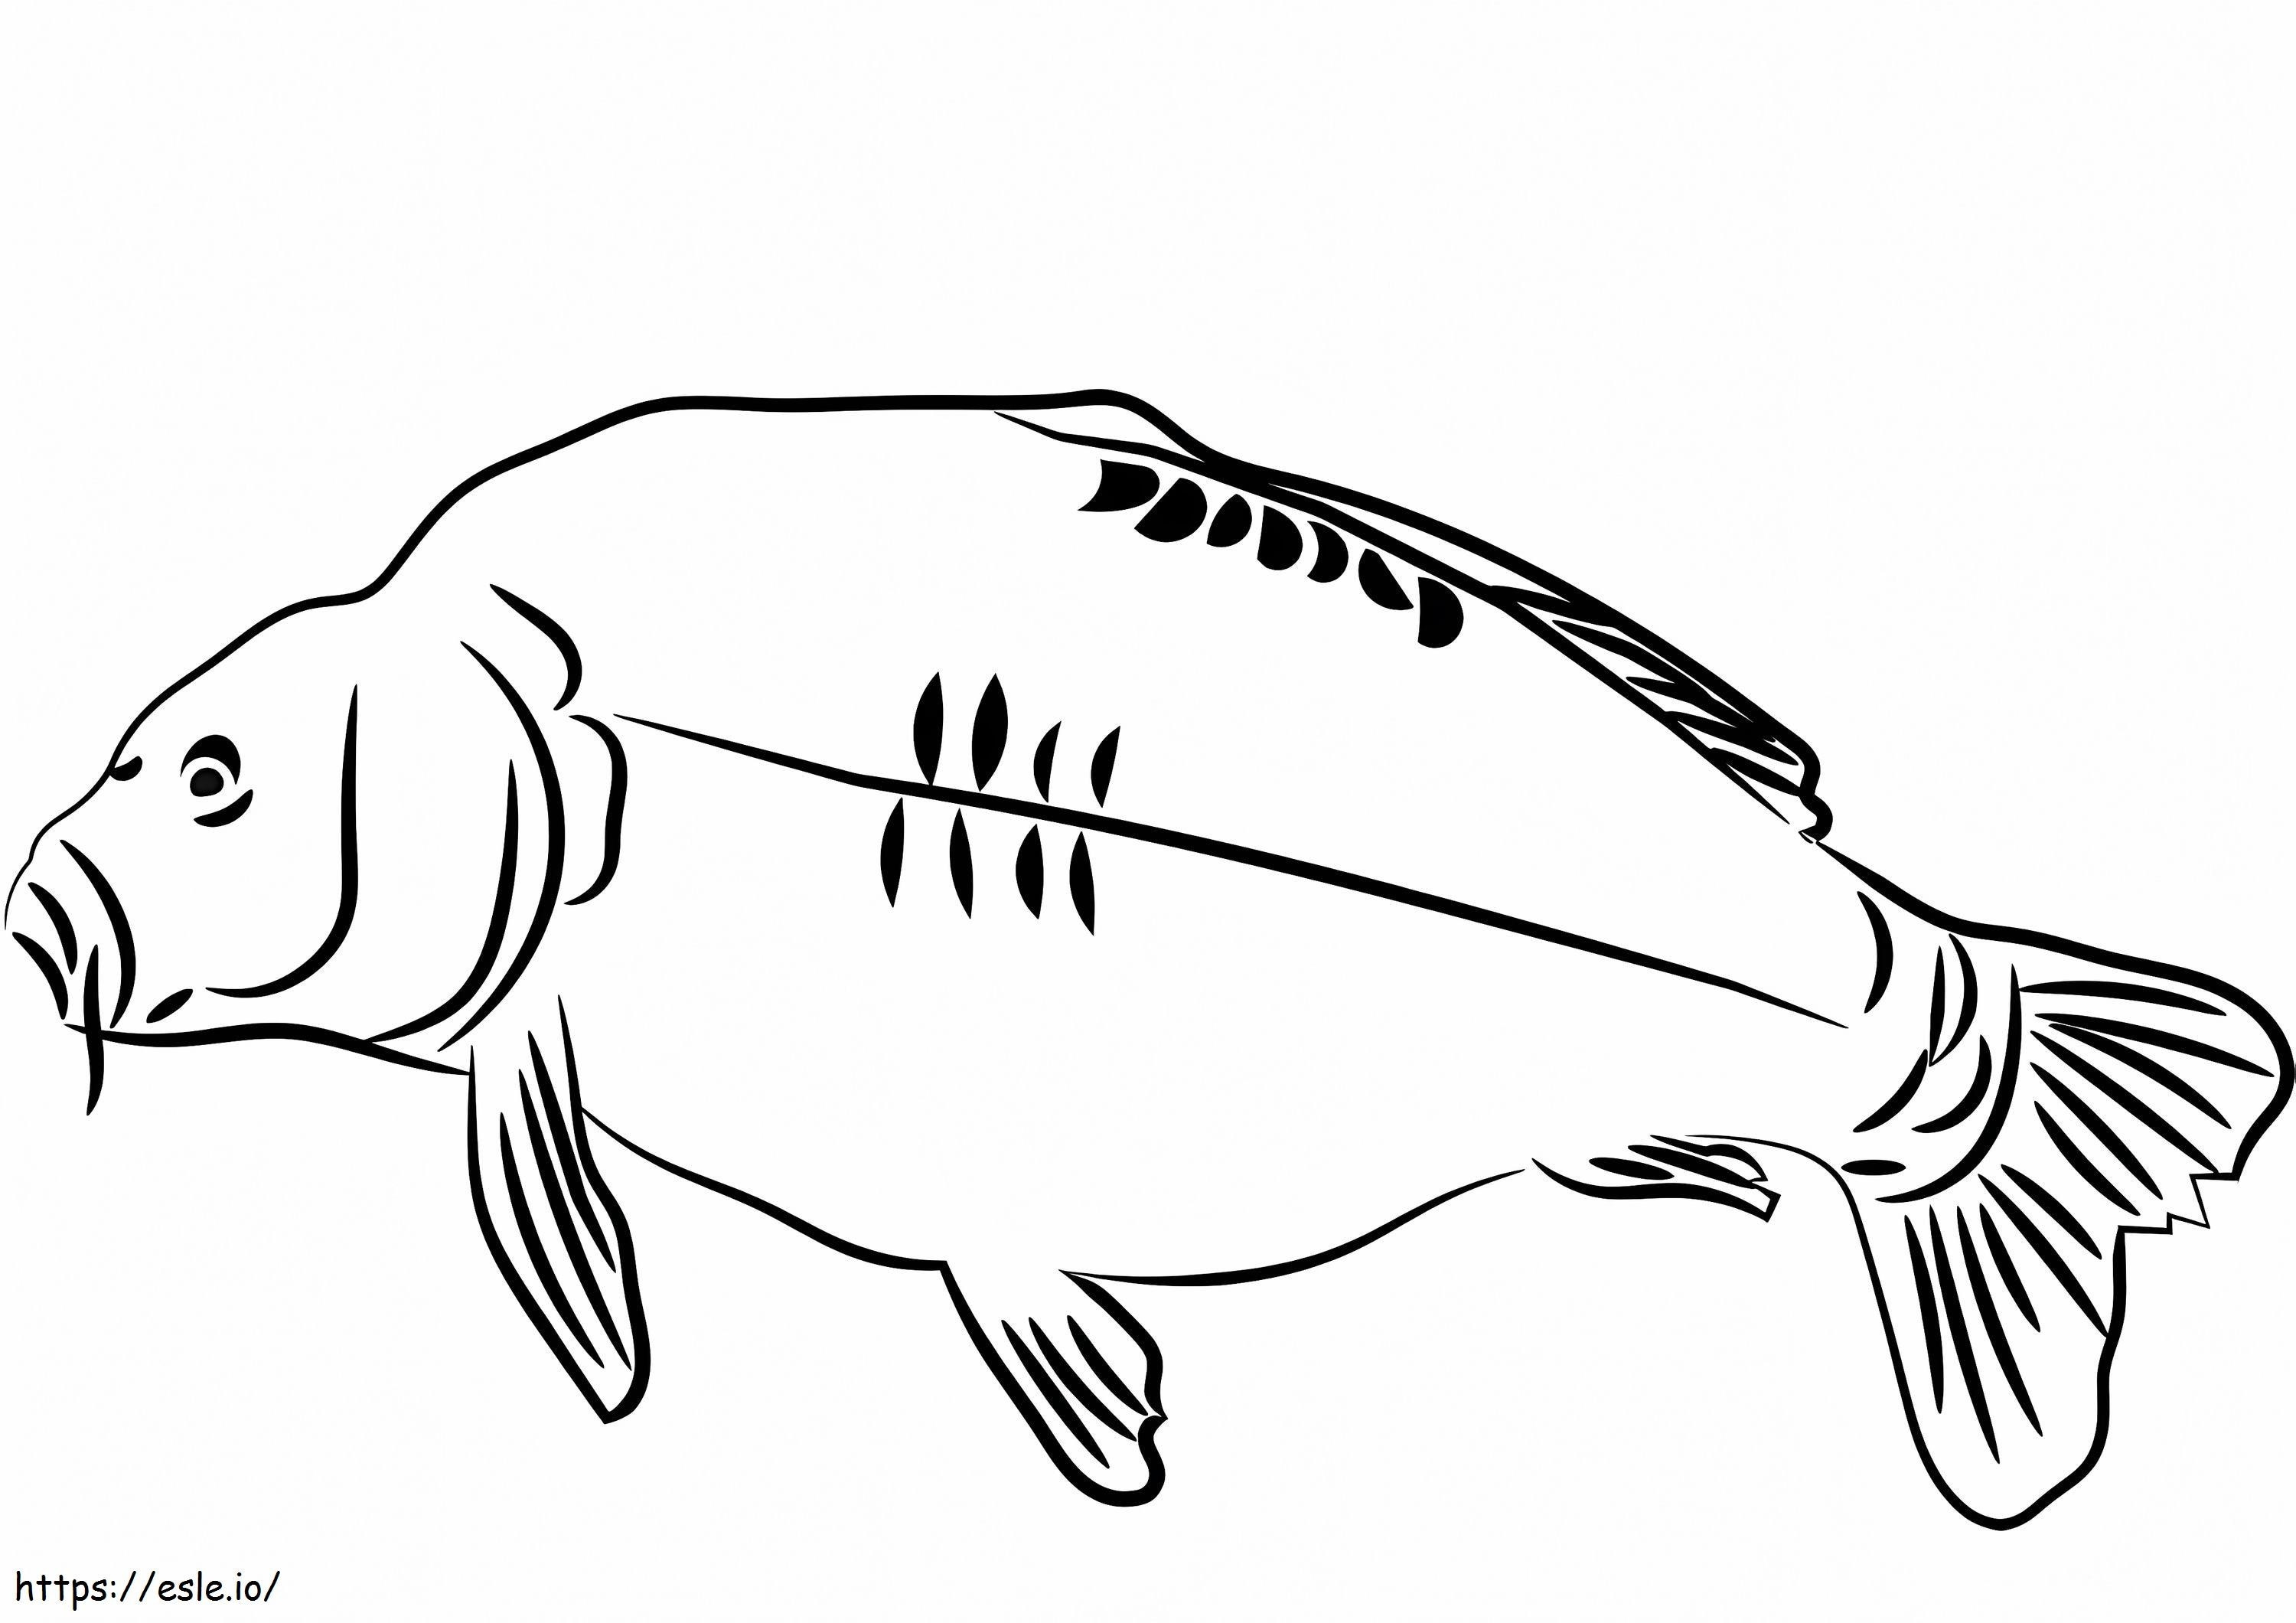 Easy Carp coloring page